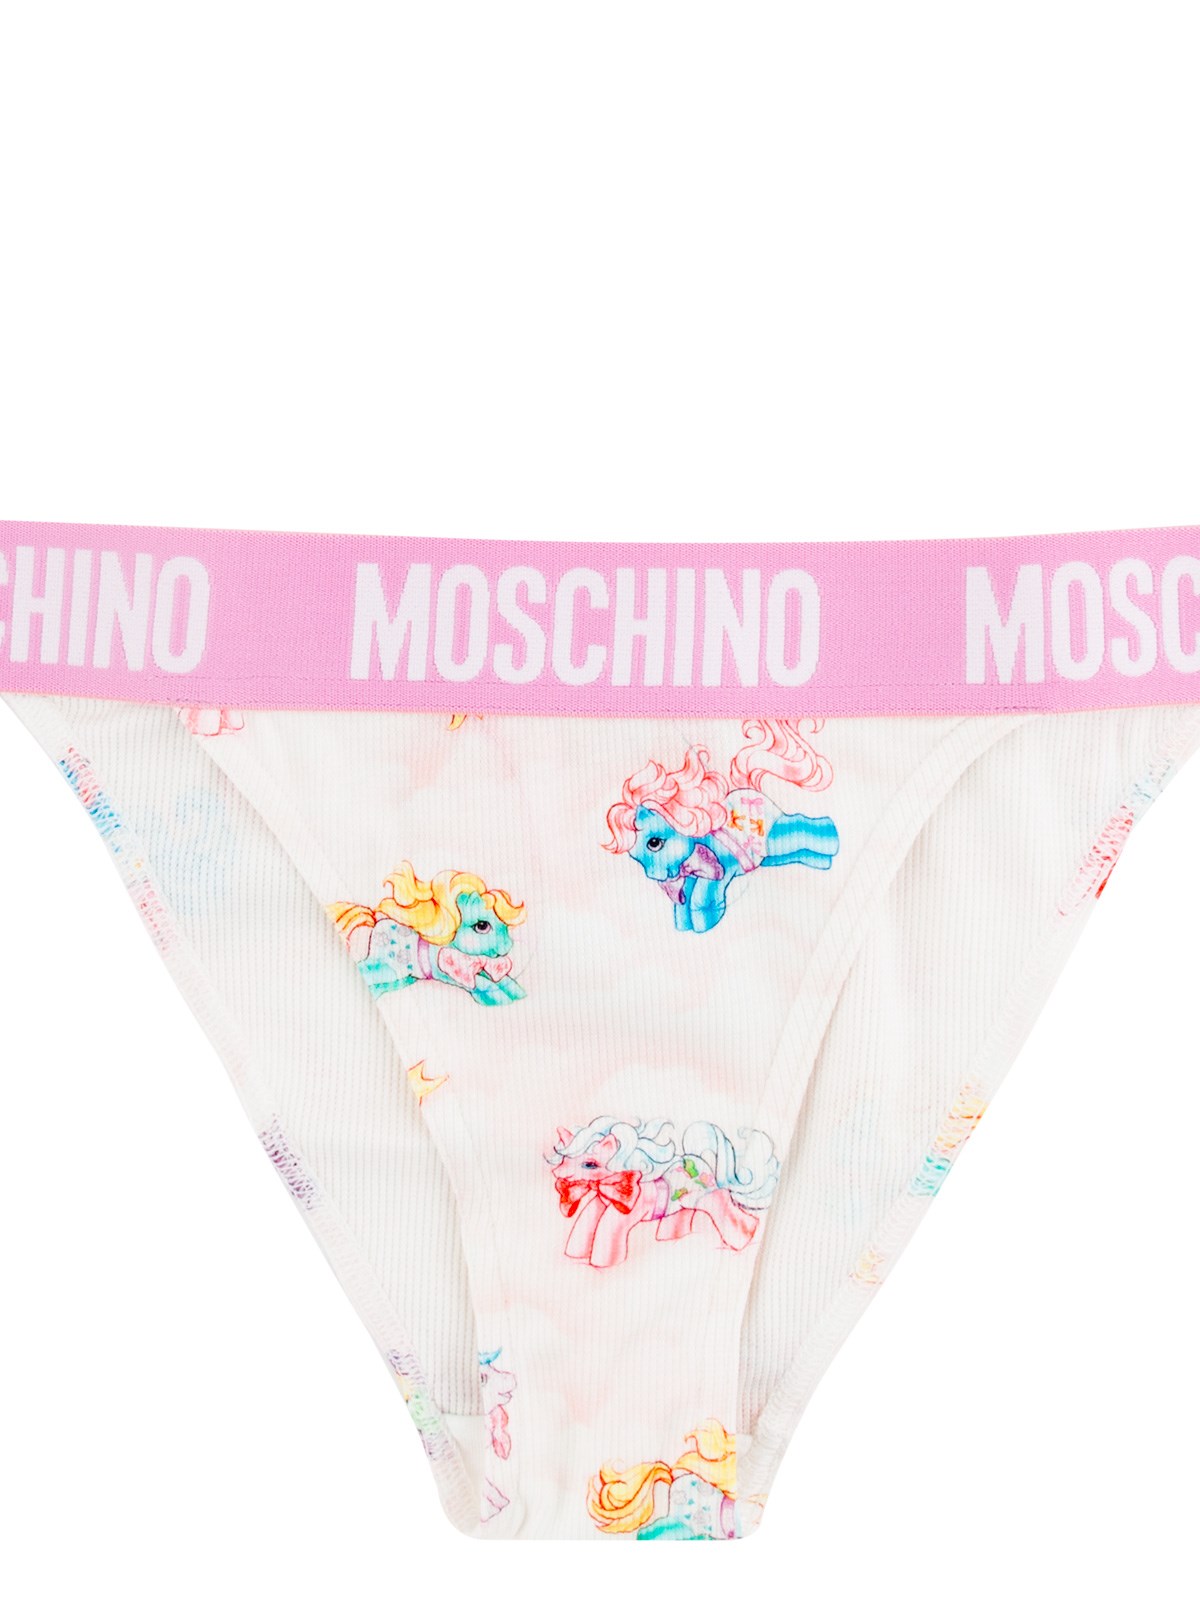 moschino MY LITTLE PONY MOSCHINO ENSEMBLE LINGERIE available on ...